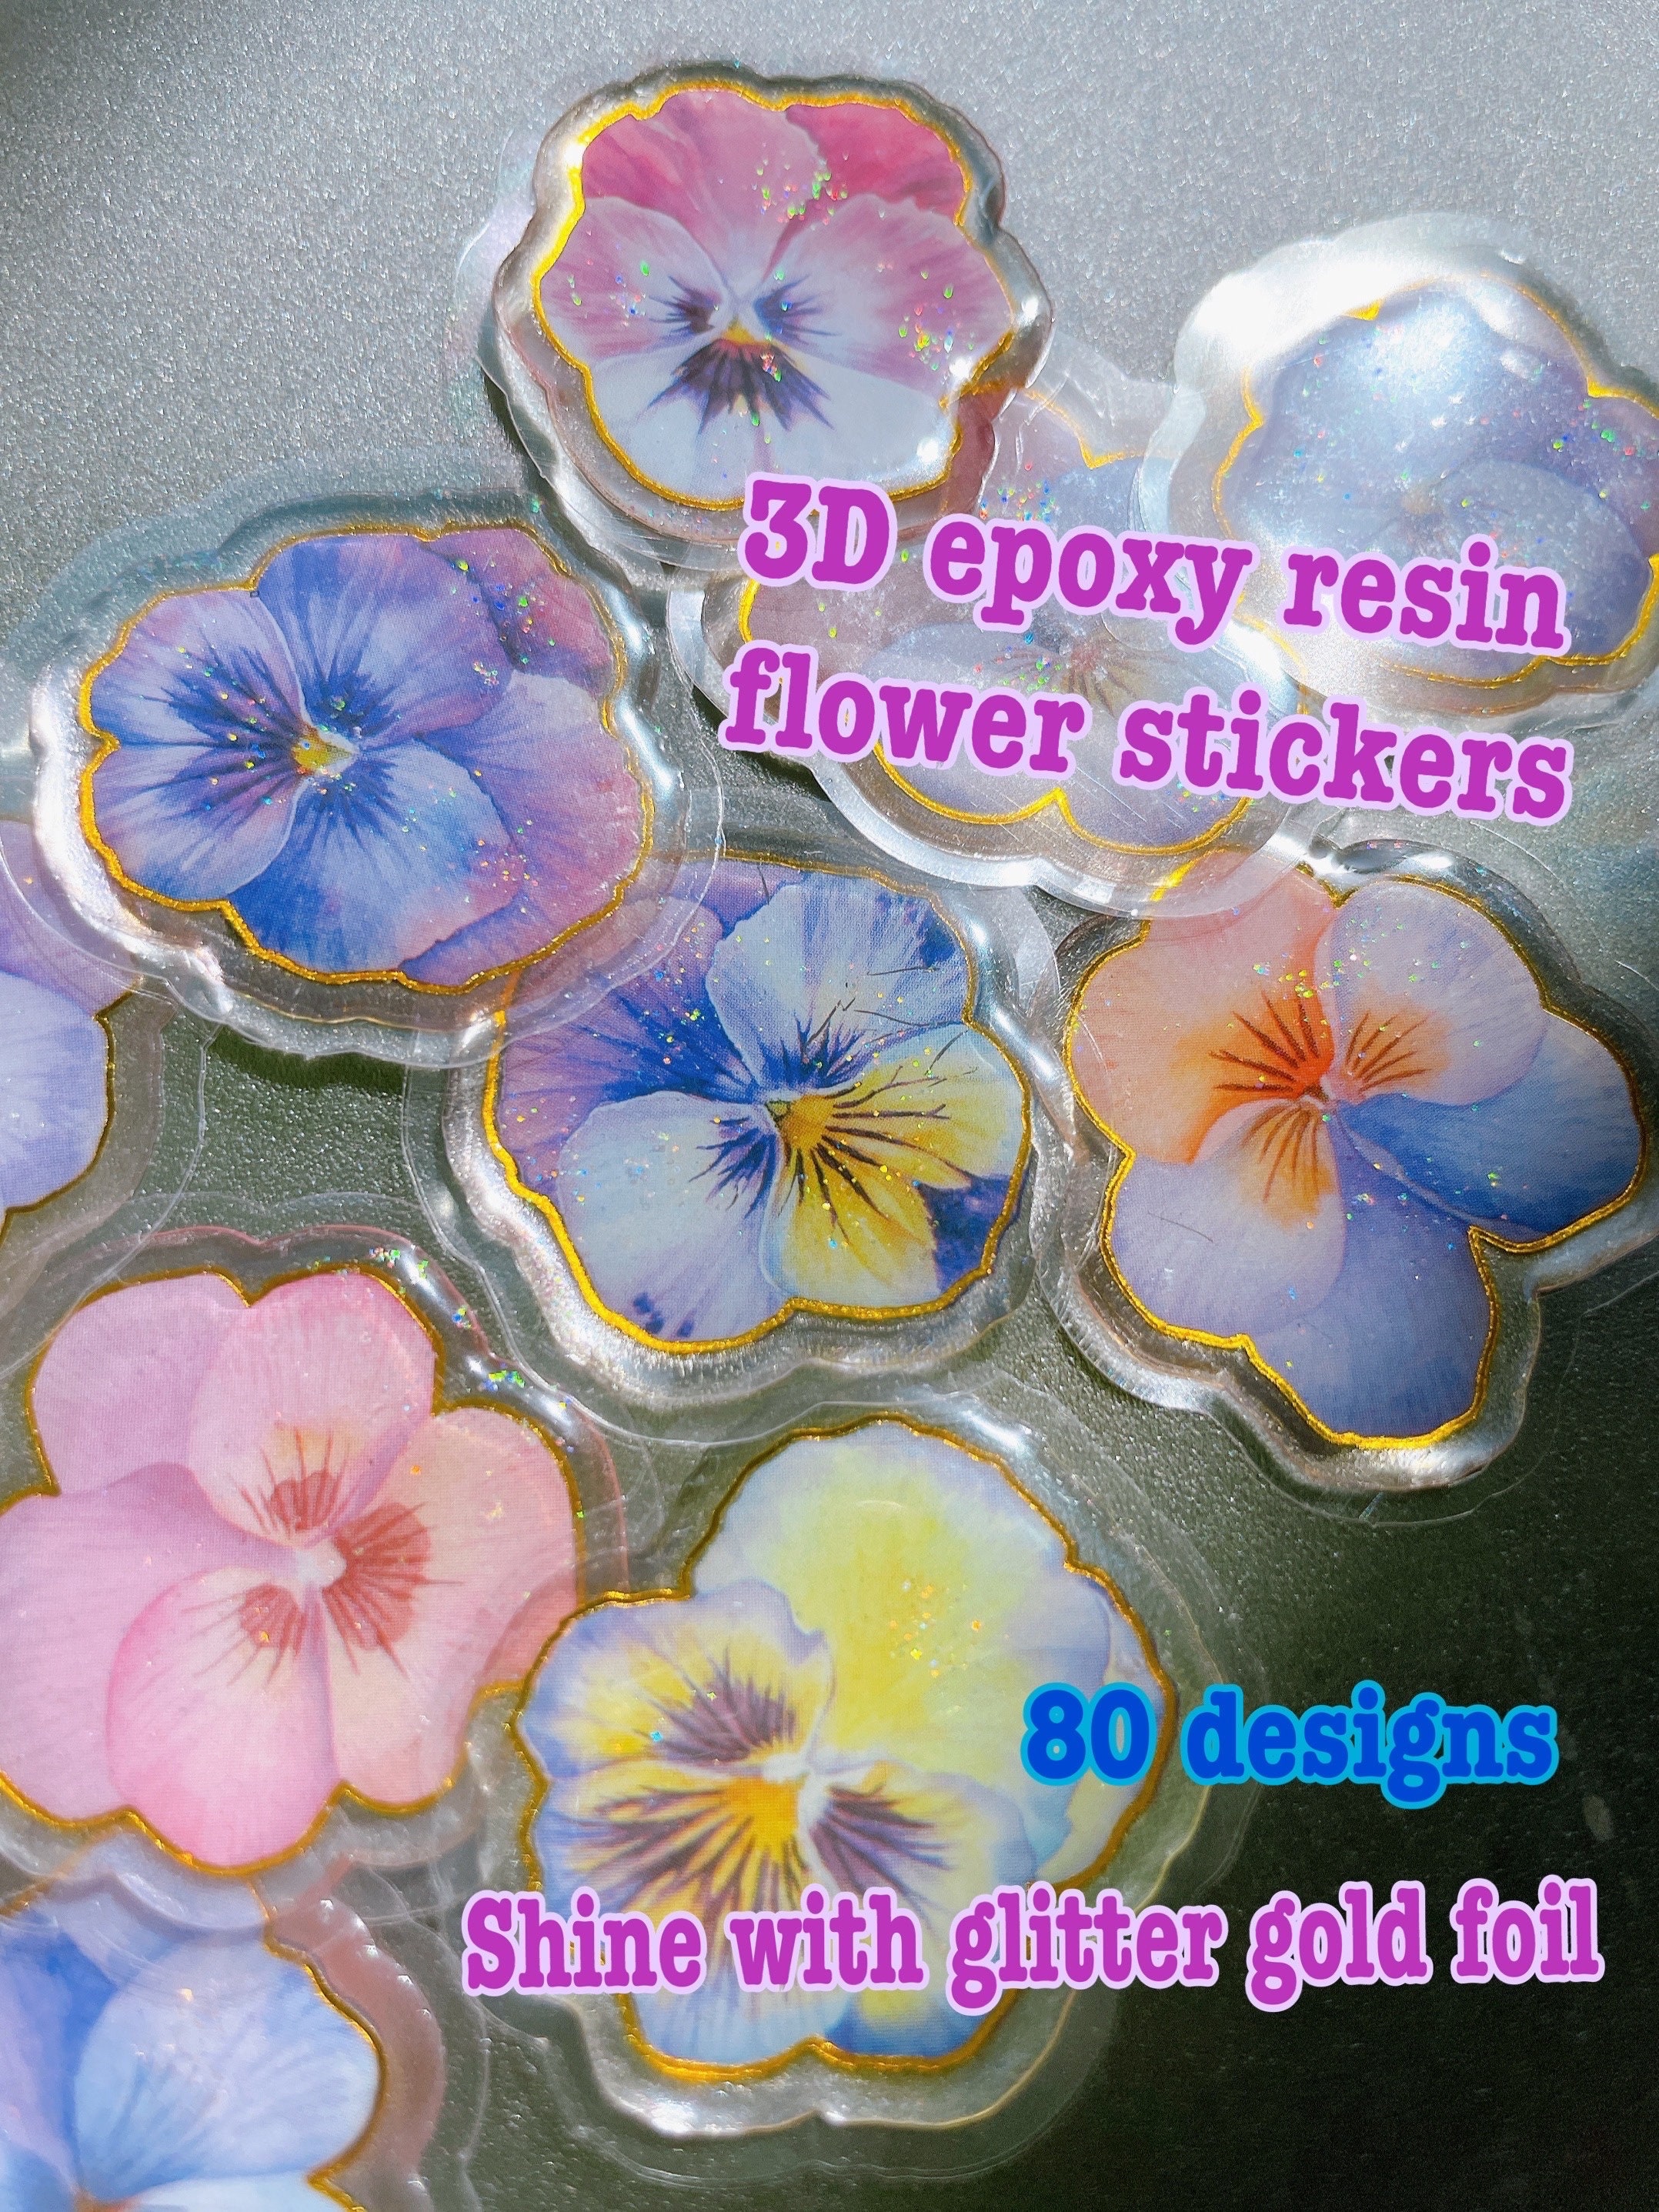 How to Make Epoxy Resin Stickers  Resin crafts tutorial, Epoxy